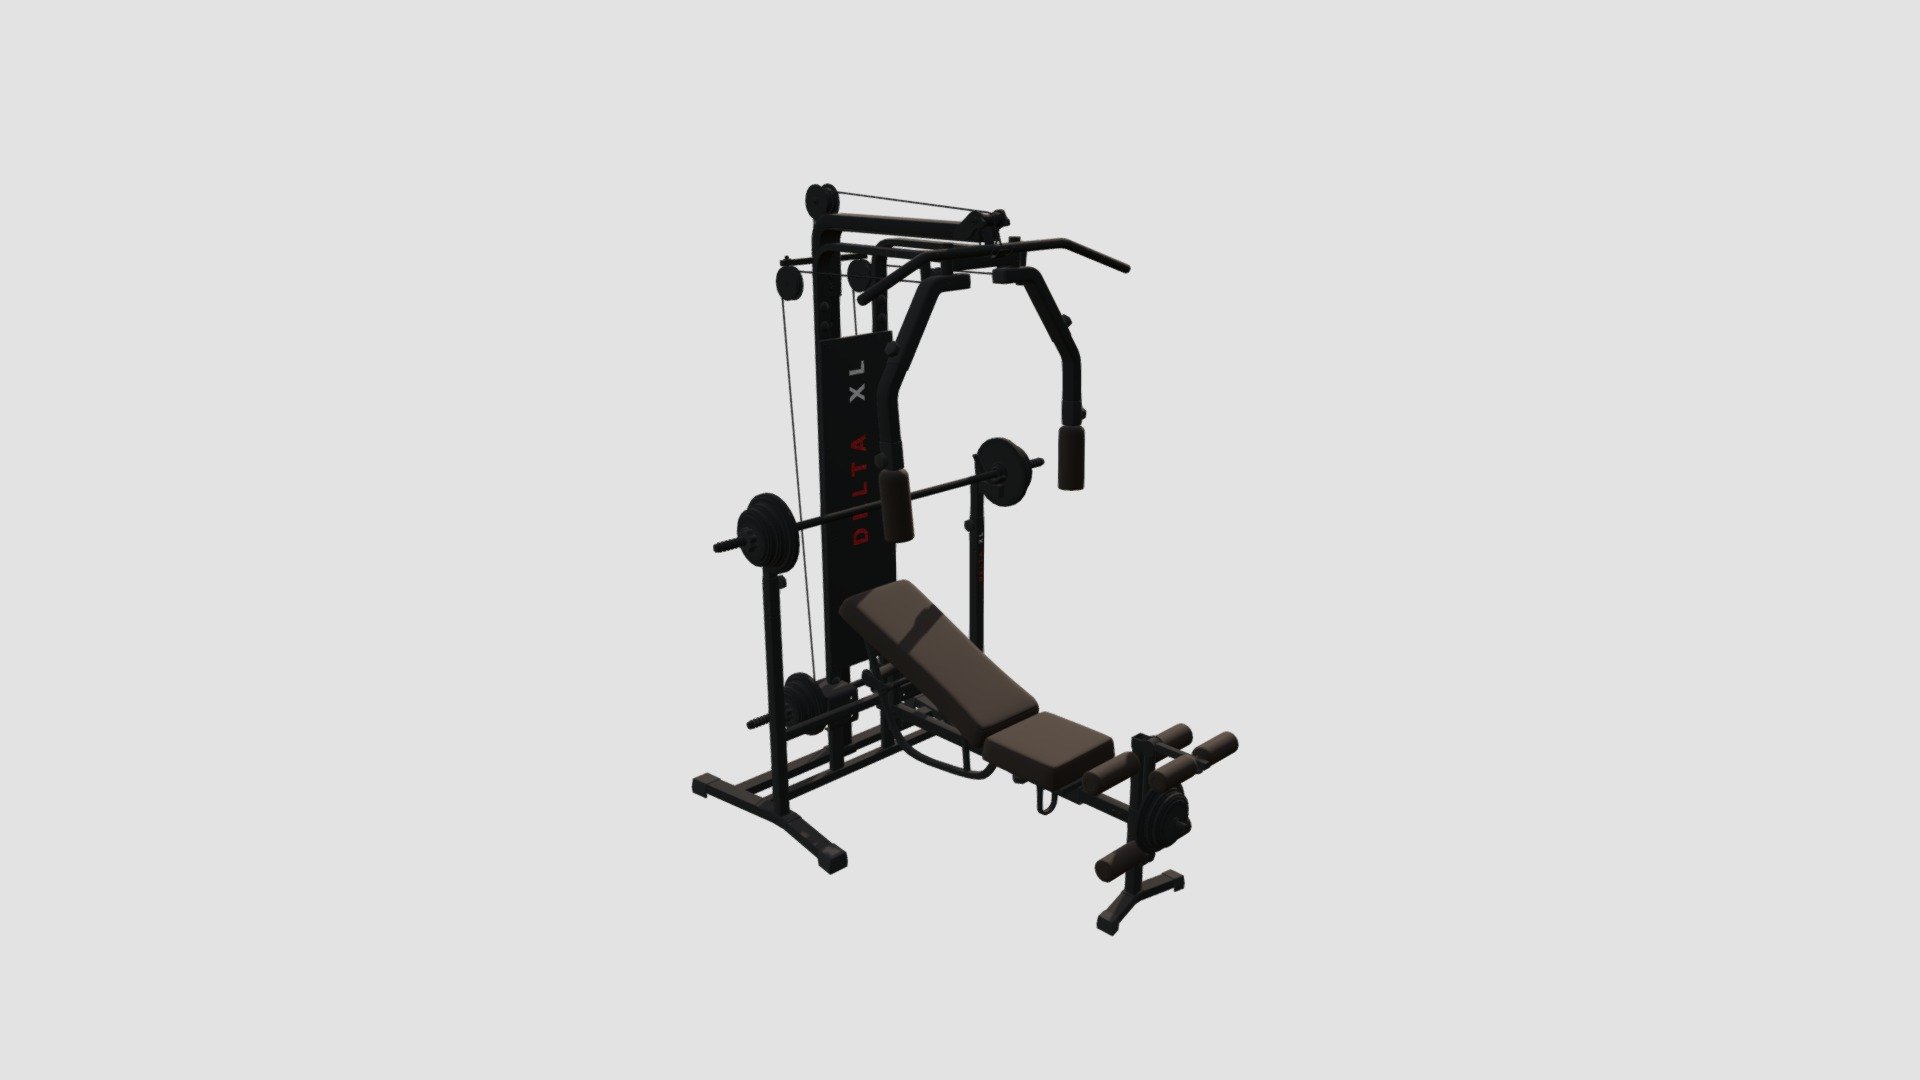 Highly detailed 3d model of gym equipment with all textures, shaders and materials. It is ready to use, just put it into your scene 3d model